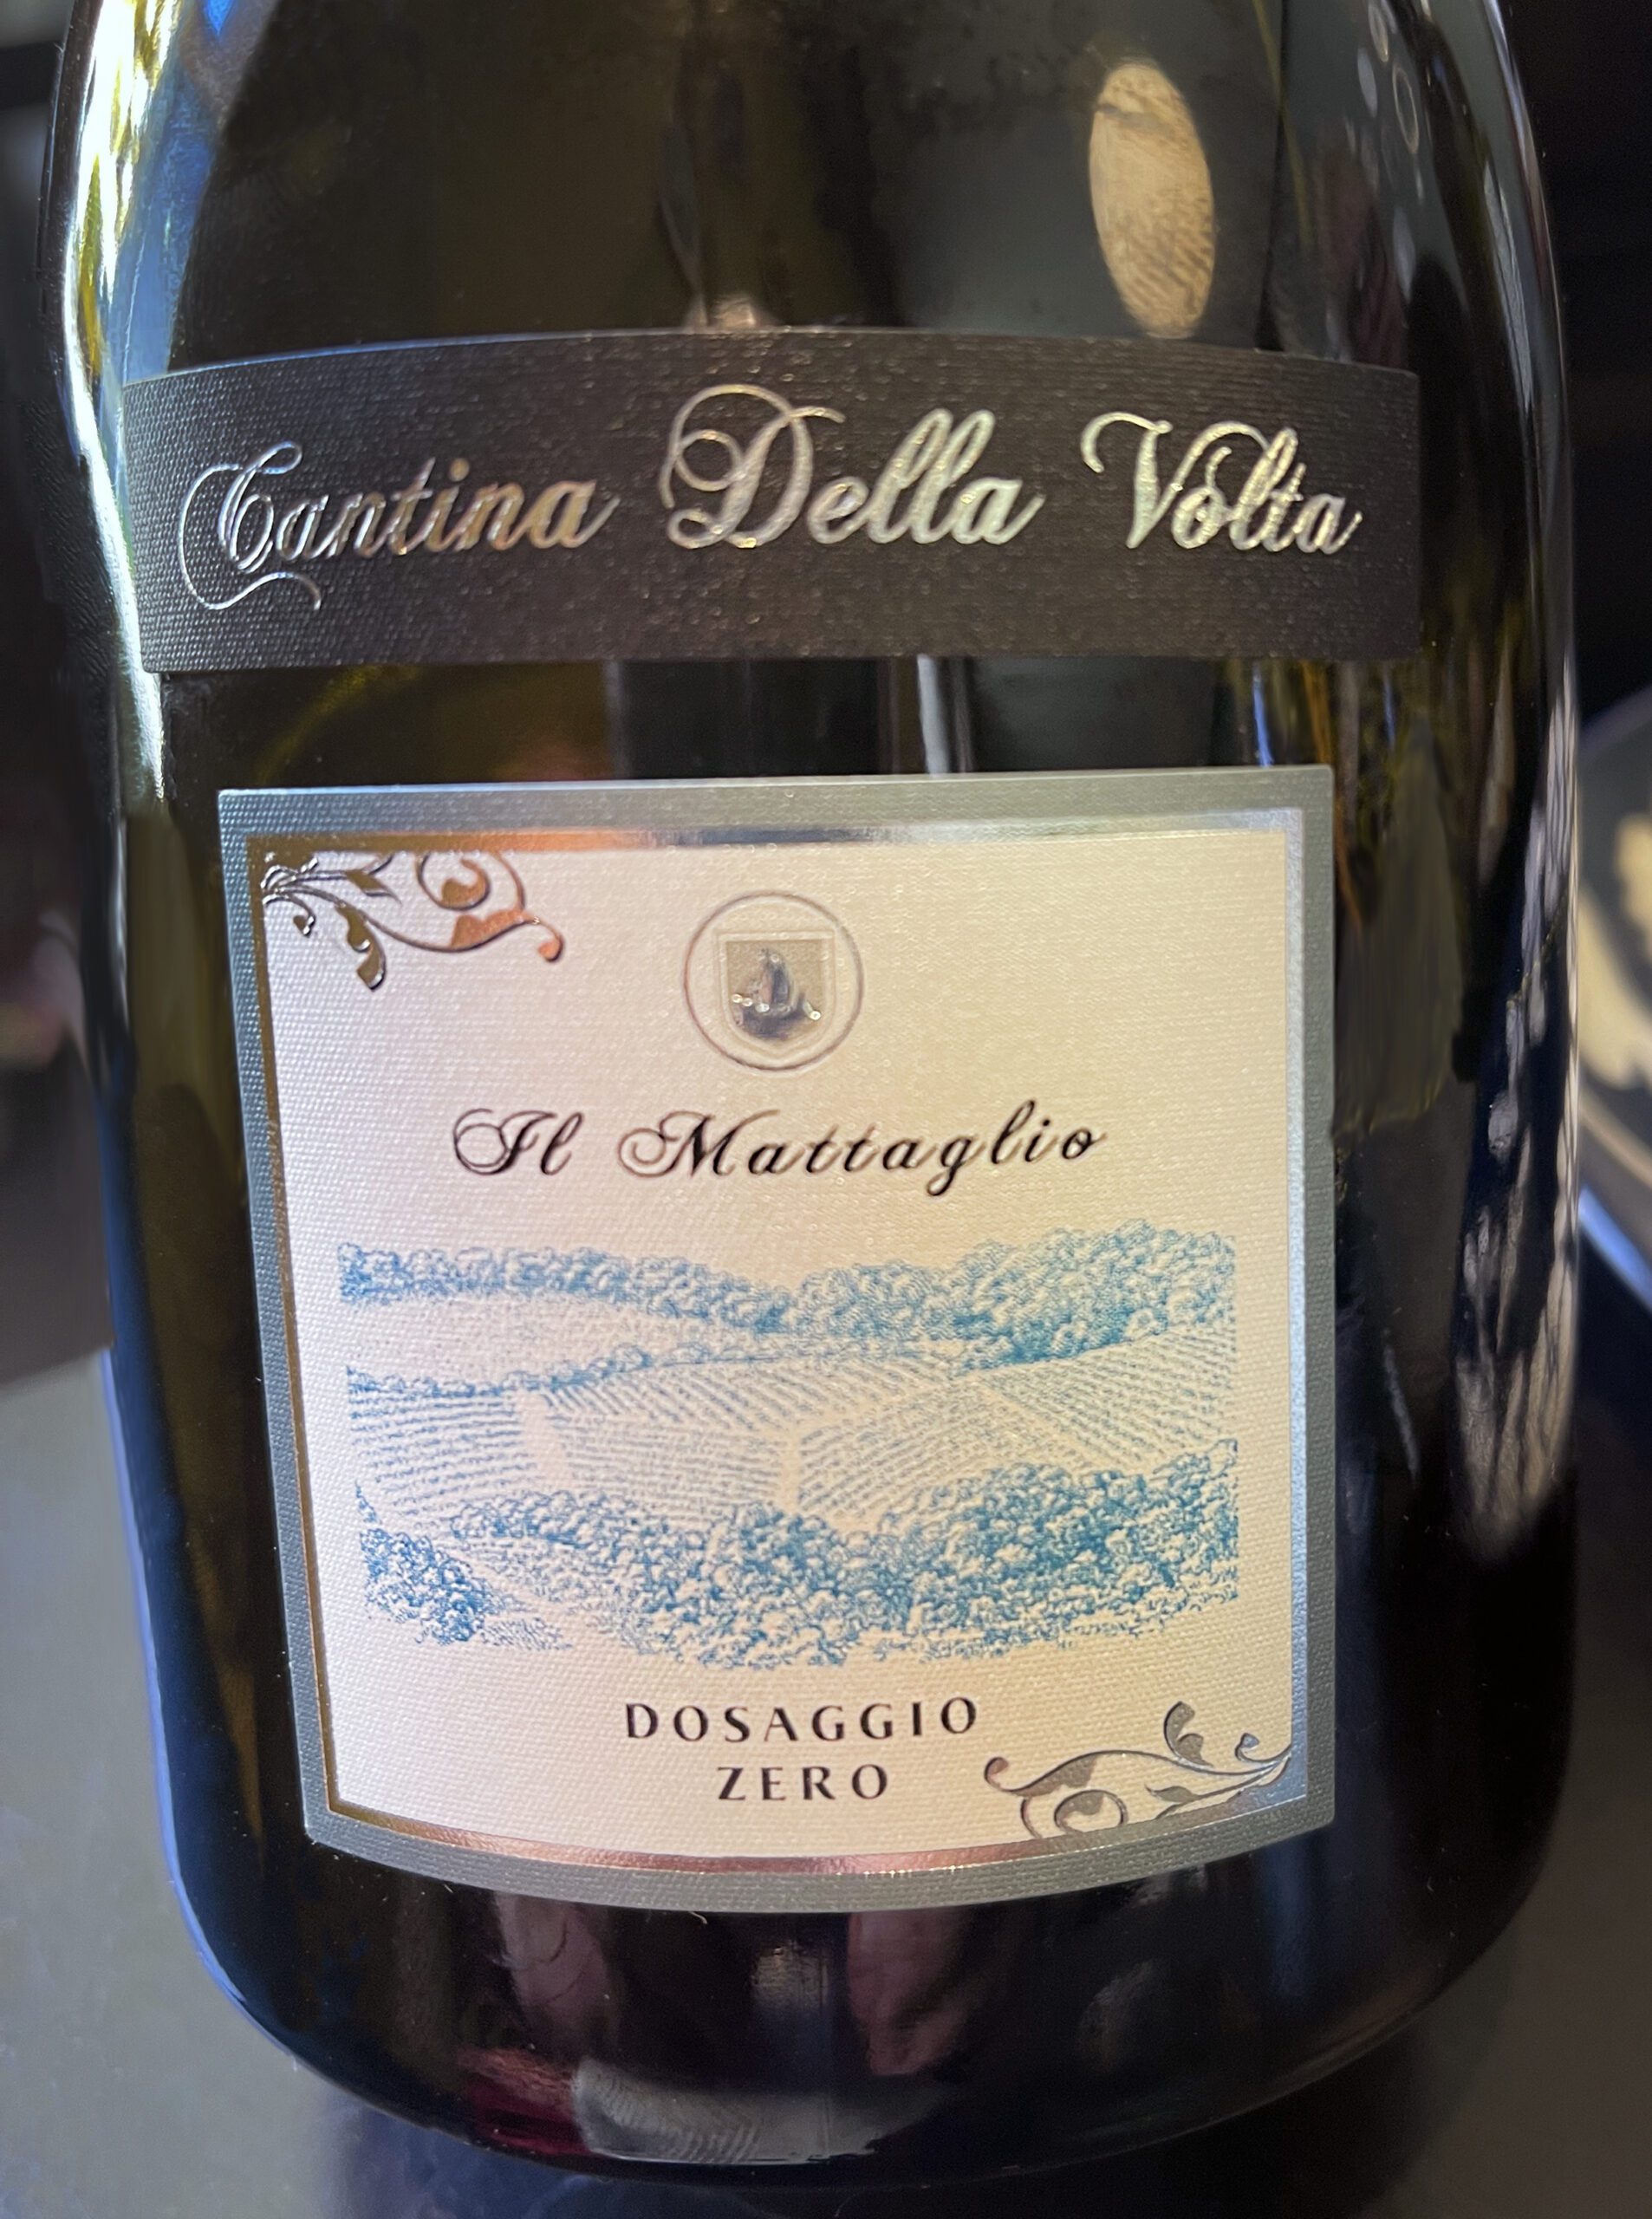 Modena-produced Cantina Della Volta Dossagio Zero, a sparkling wine that was a delicious and bright blend of 57% Chardonnay and 43% Pinot Noir